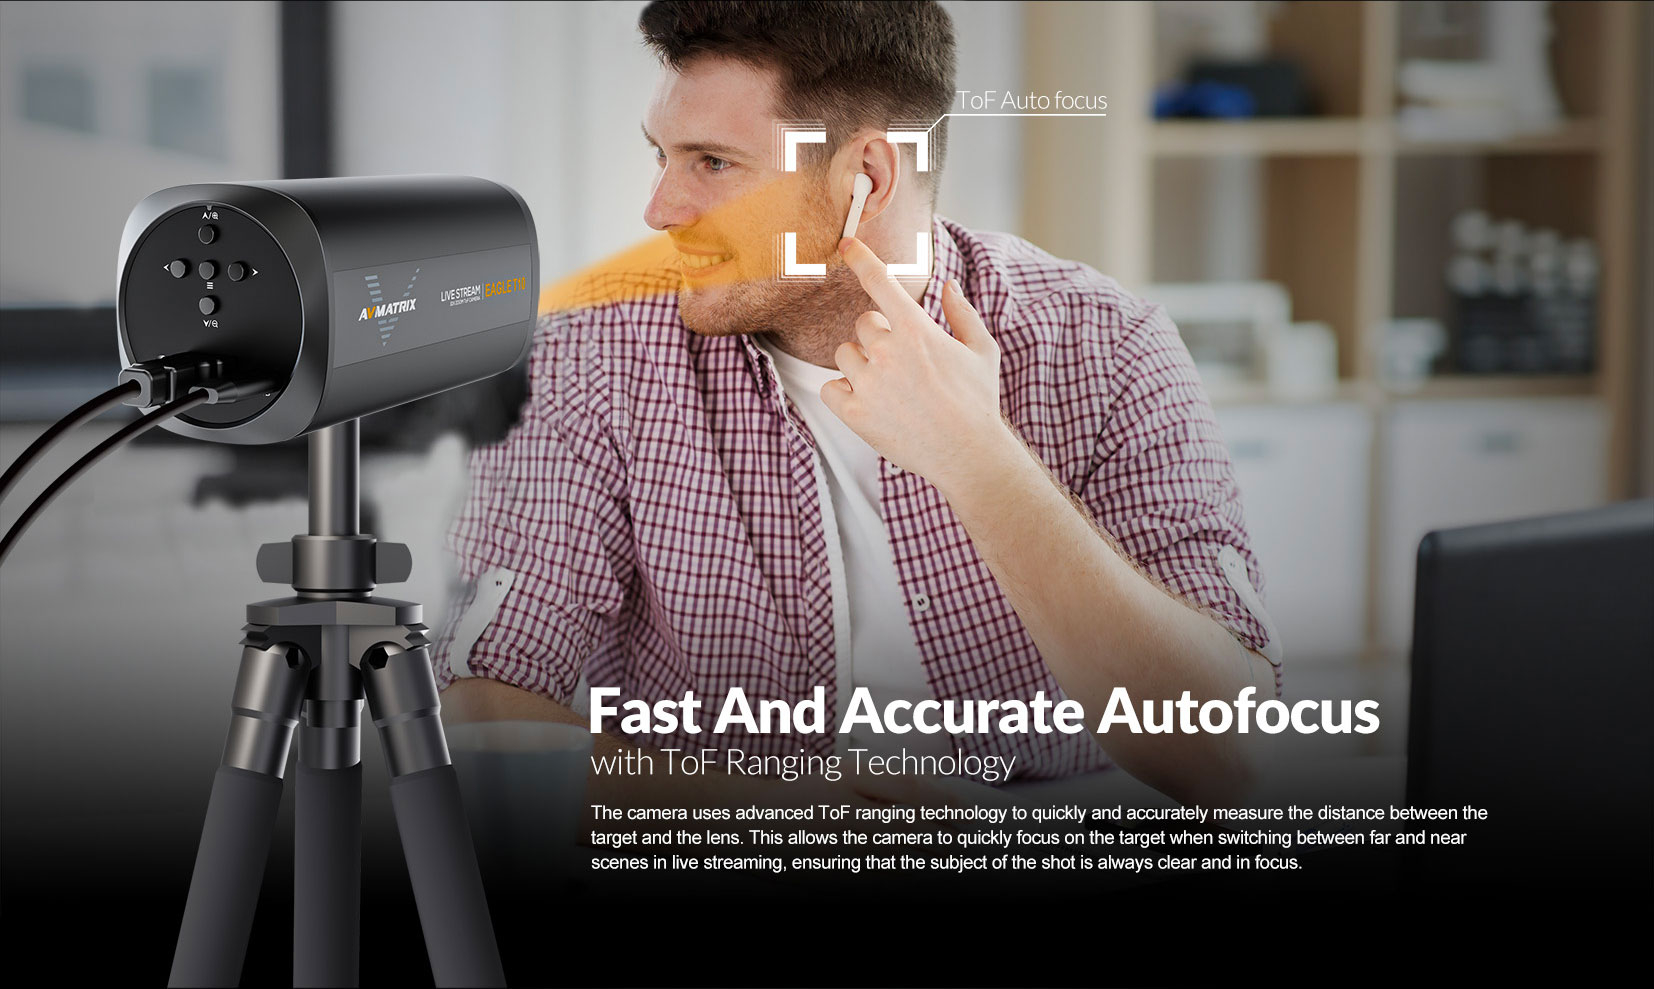 Fast and accurate autofocus with ToF ranging technology